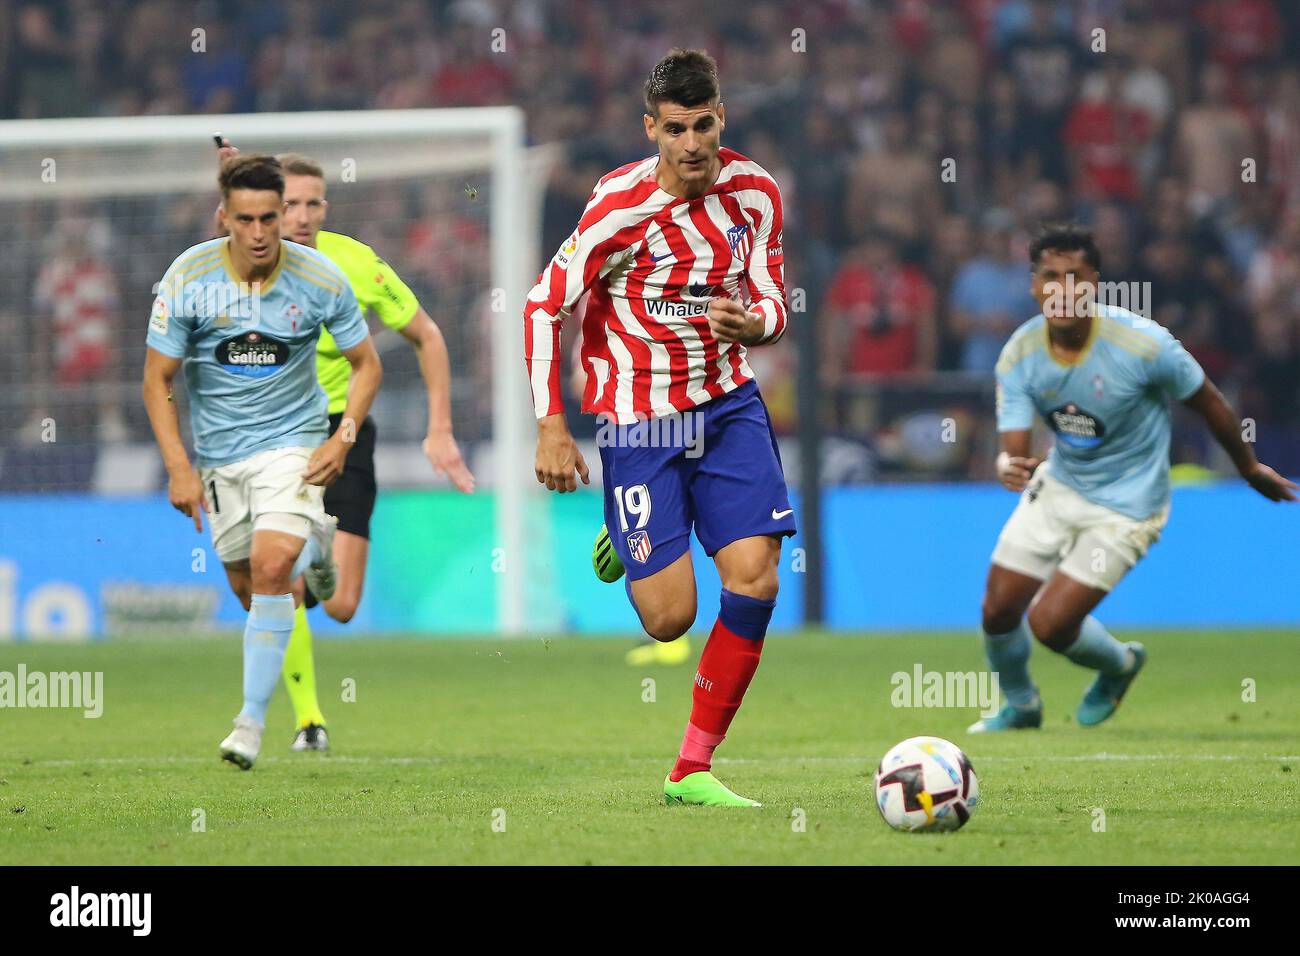 Madrid, Spain. 10th Sep, 2022. Atletico´s Morata in action during La Liga match day 5 between Atletico de Madrid and Celta at Civitas Metropolitano Stadium in Madrid, Spain, on September 10, 2022. Credit: Edward F. Peters/Alamy Live News Stock Photo